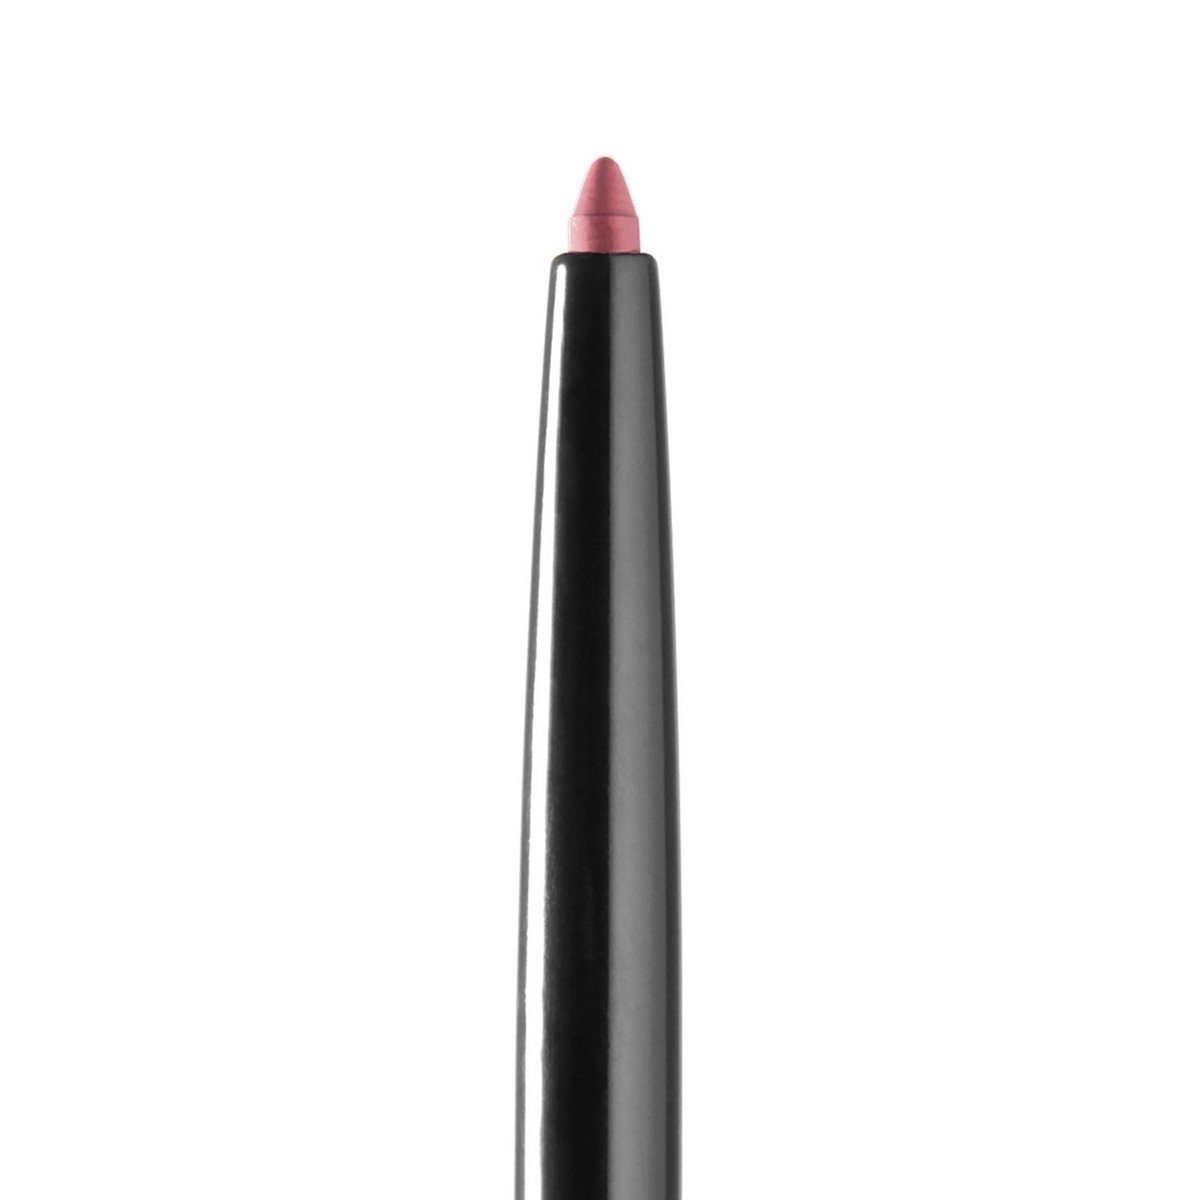 Maybelline Color Sensational Shaping Lip Liner 50 Dusty Rose 1pc